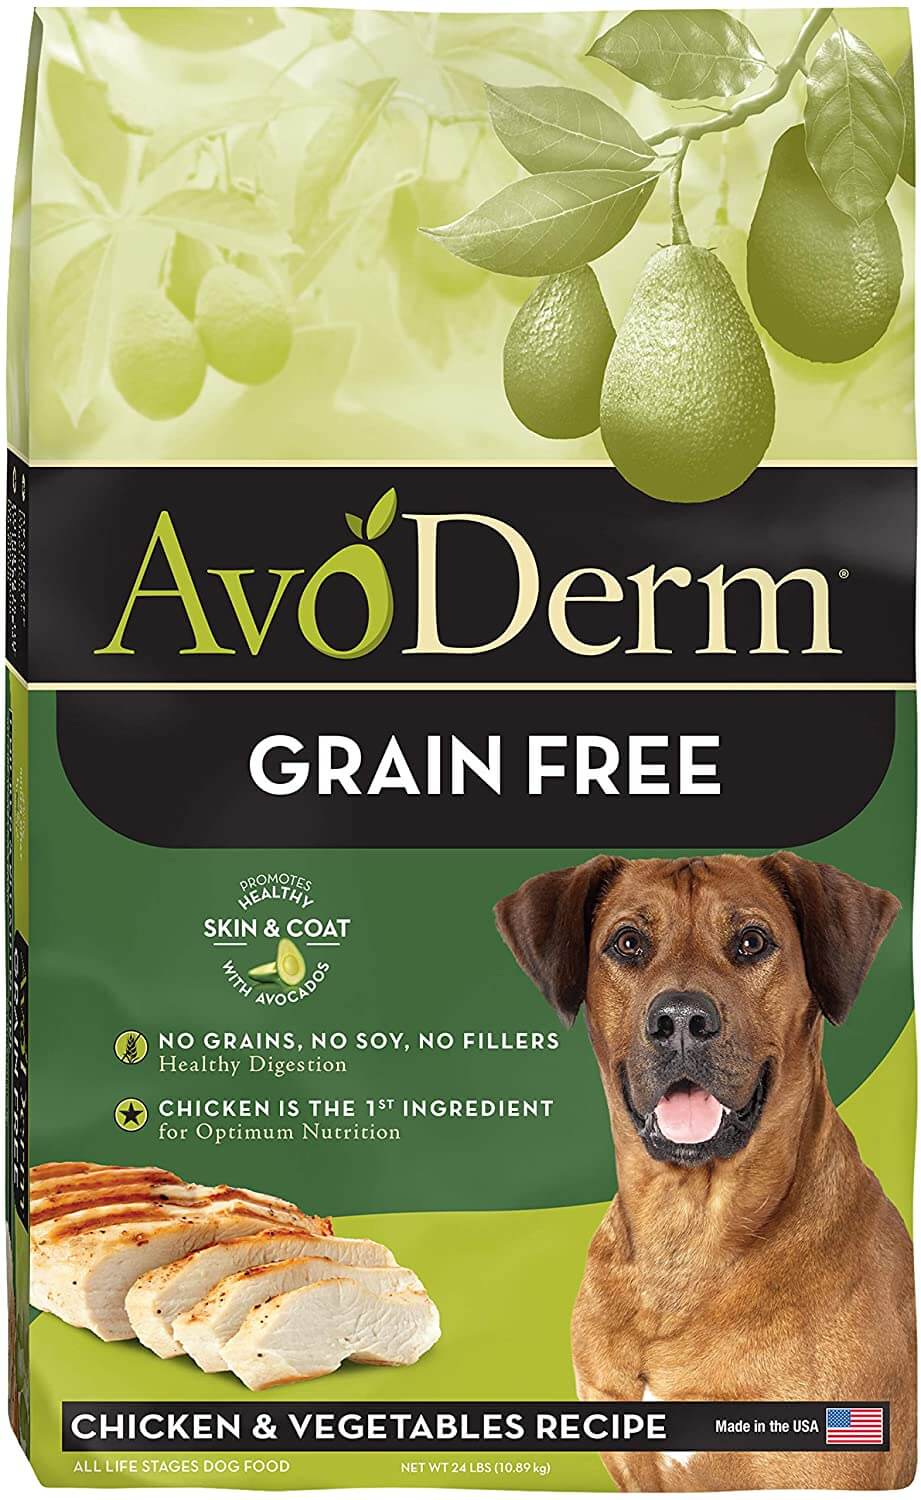 7 Best Dog Food For Sensitive Stomach For 2020 (Reviews